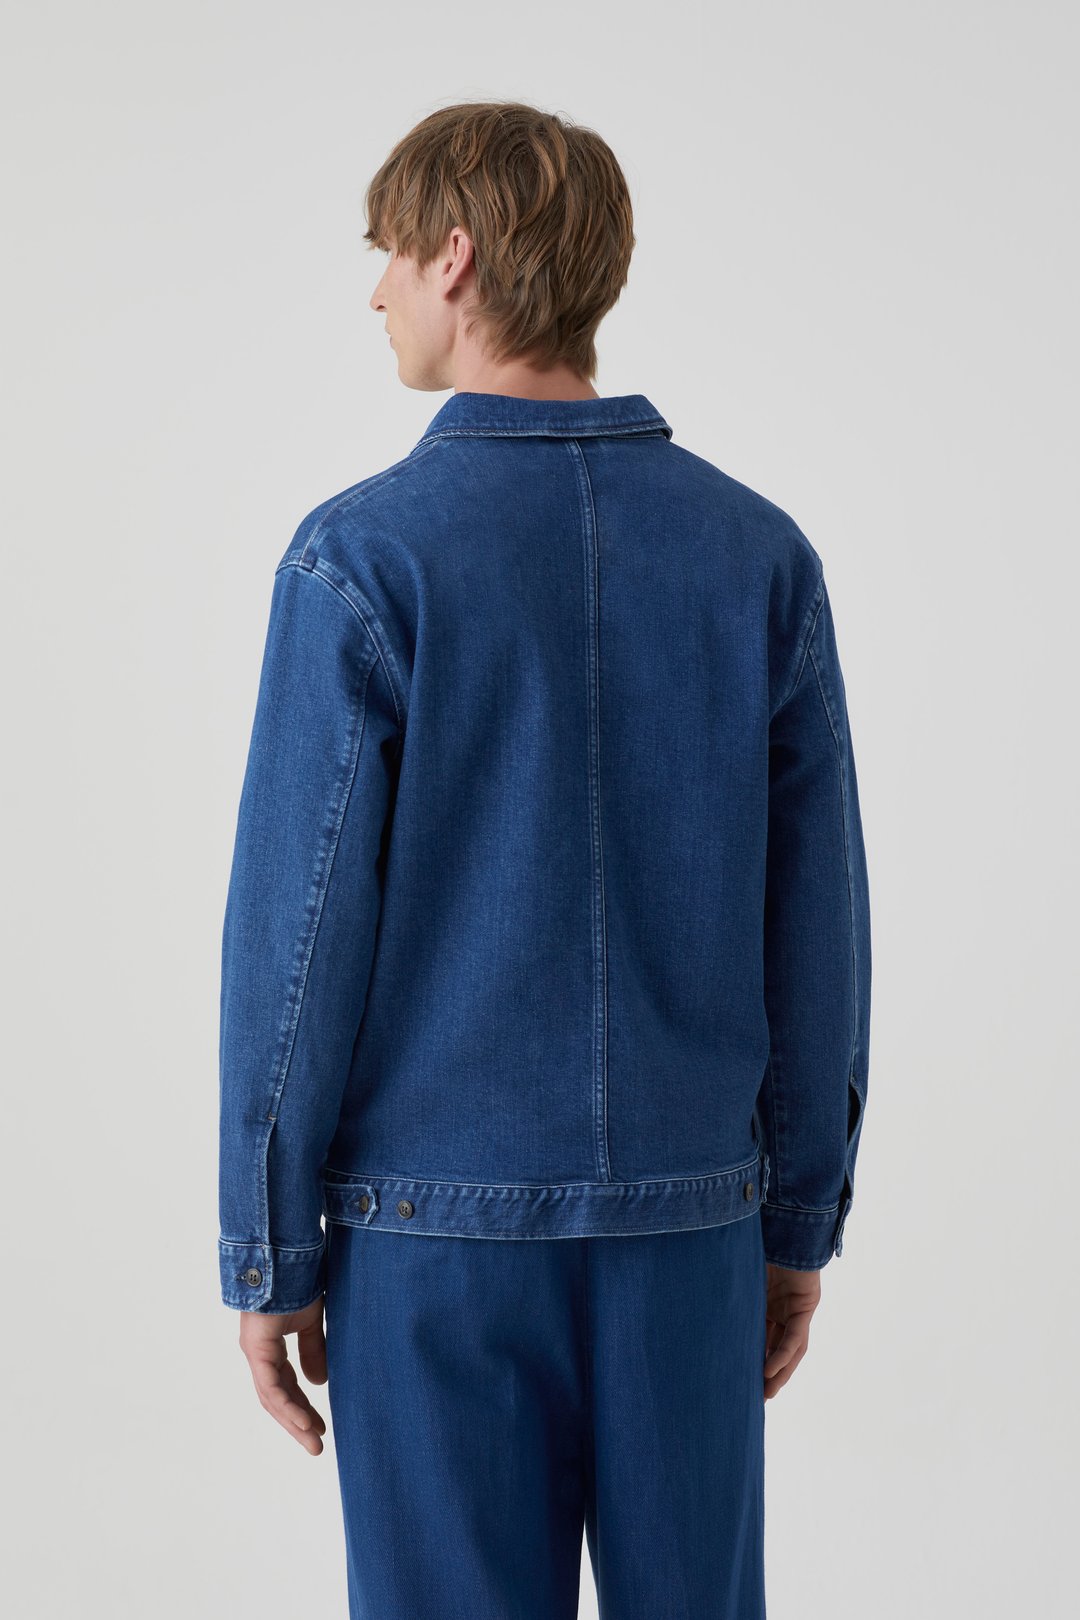 A BETTER BLUE WORKER JACKET | CLOSED